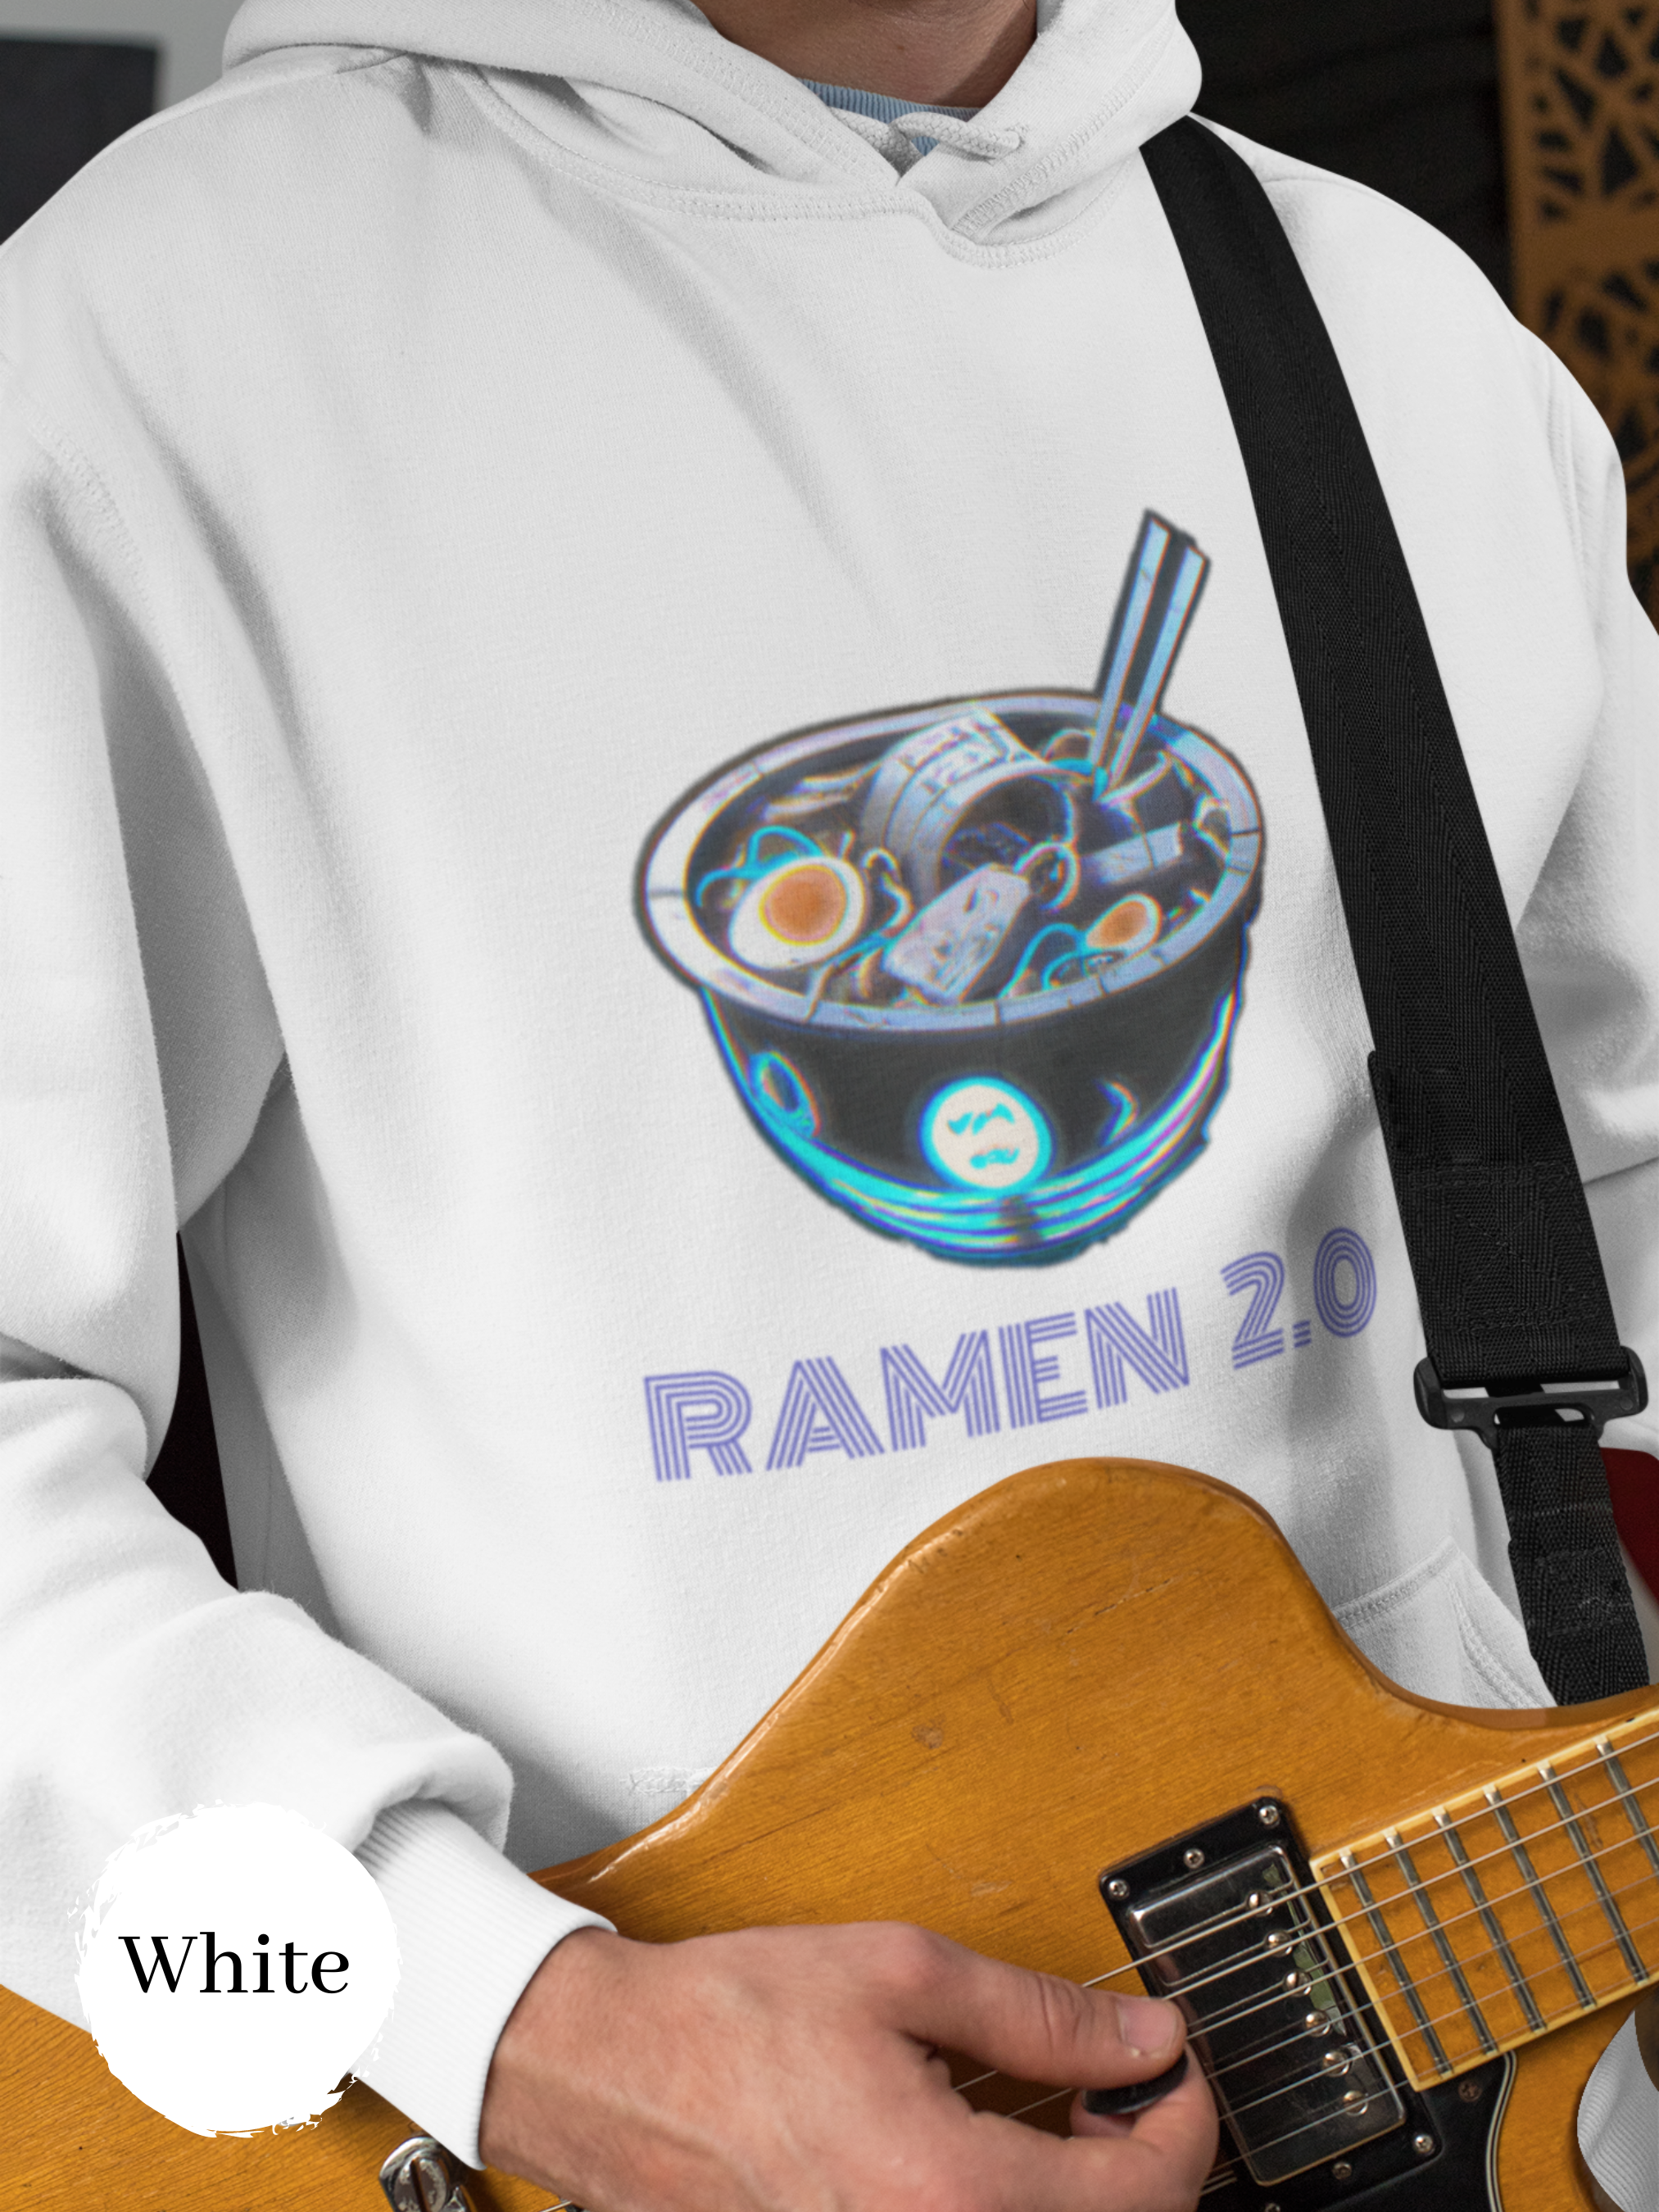 Upgrade Your Style with this Ramen 2.0 Noodles Hoodie